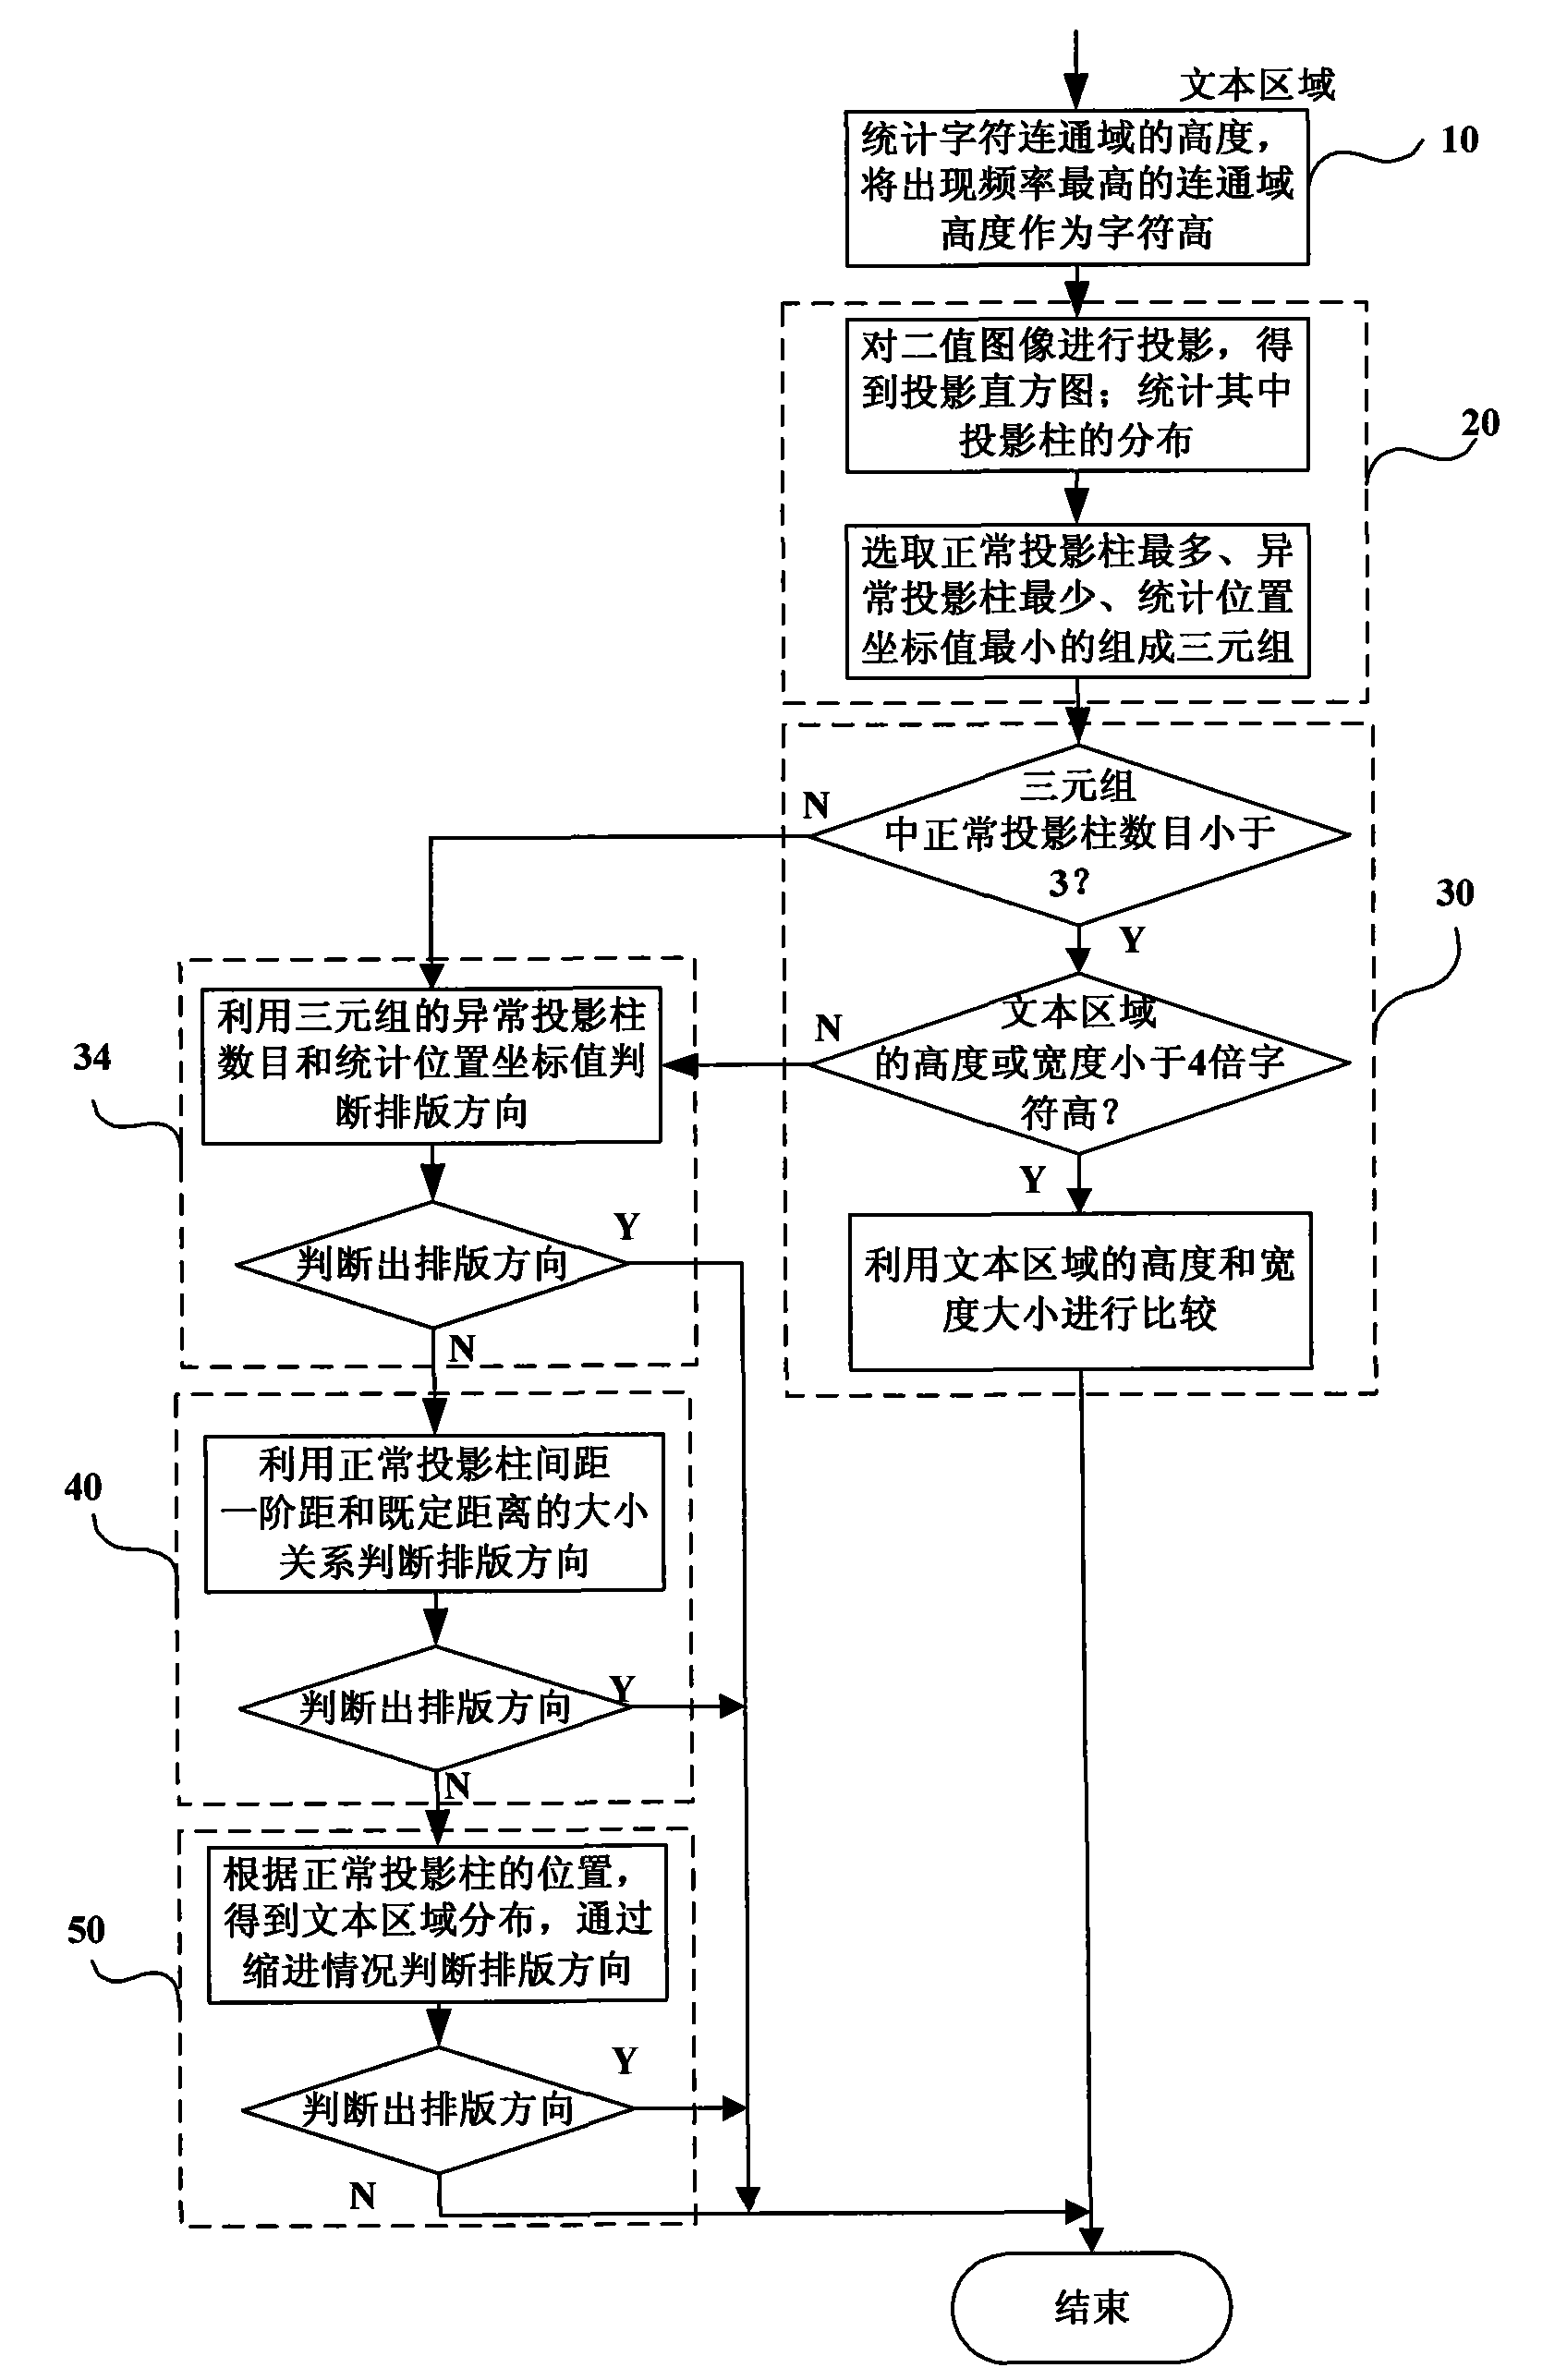 Method for judging typesetting directions of text regions